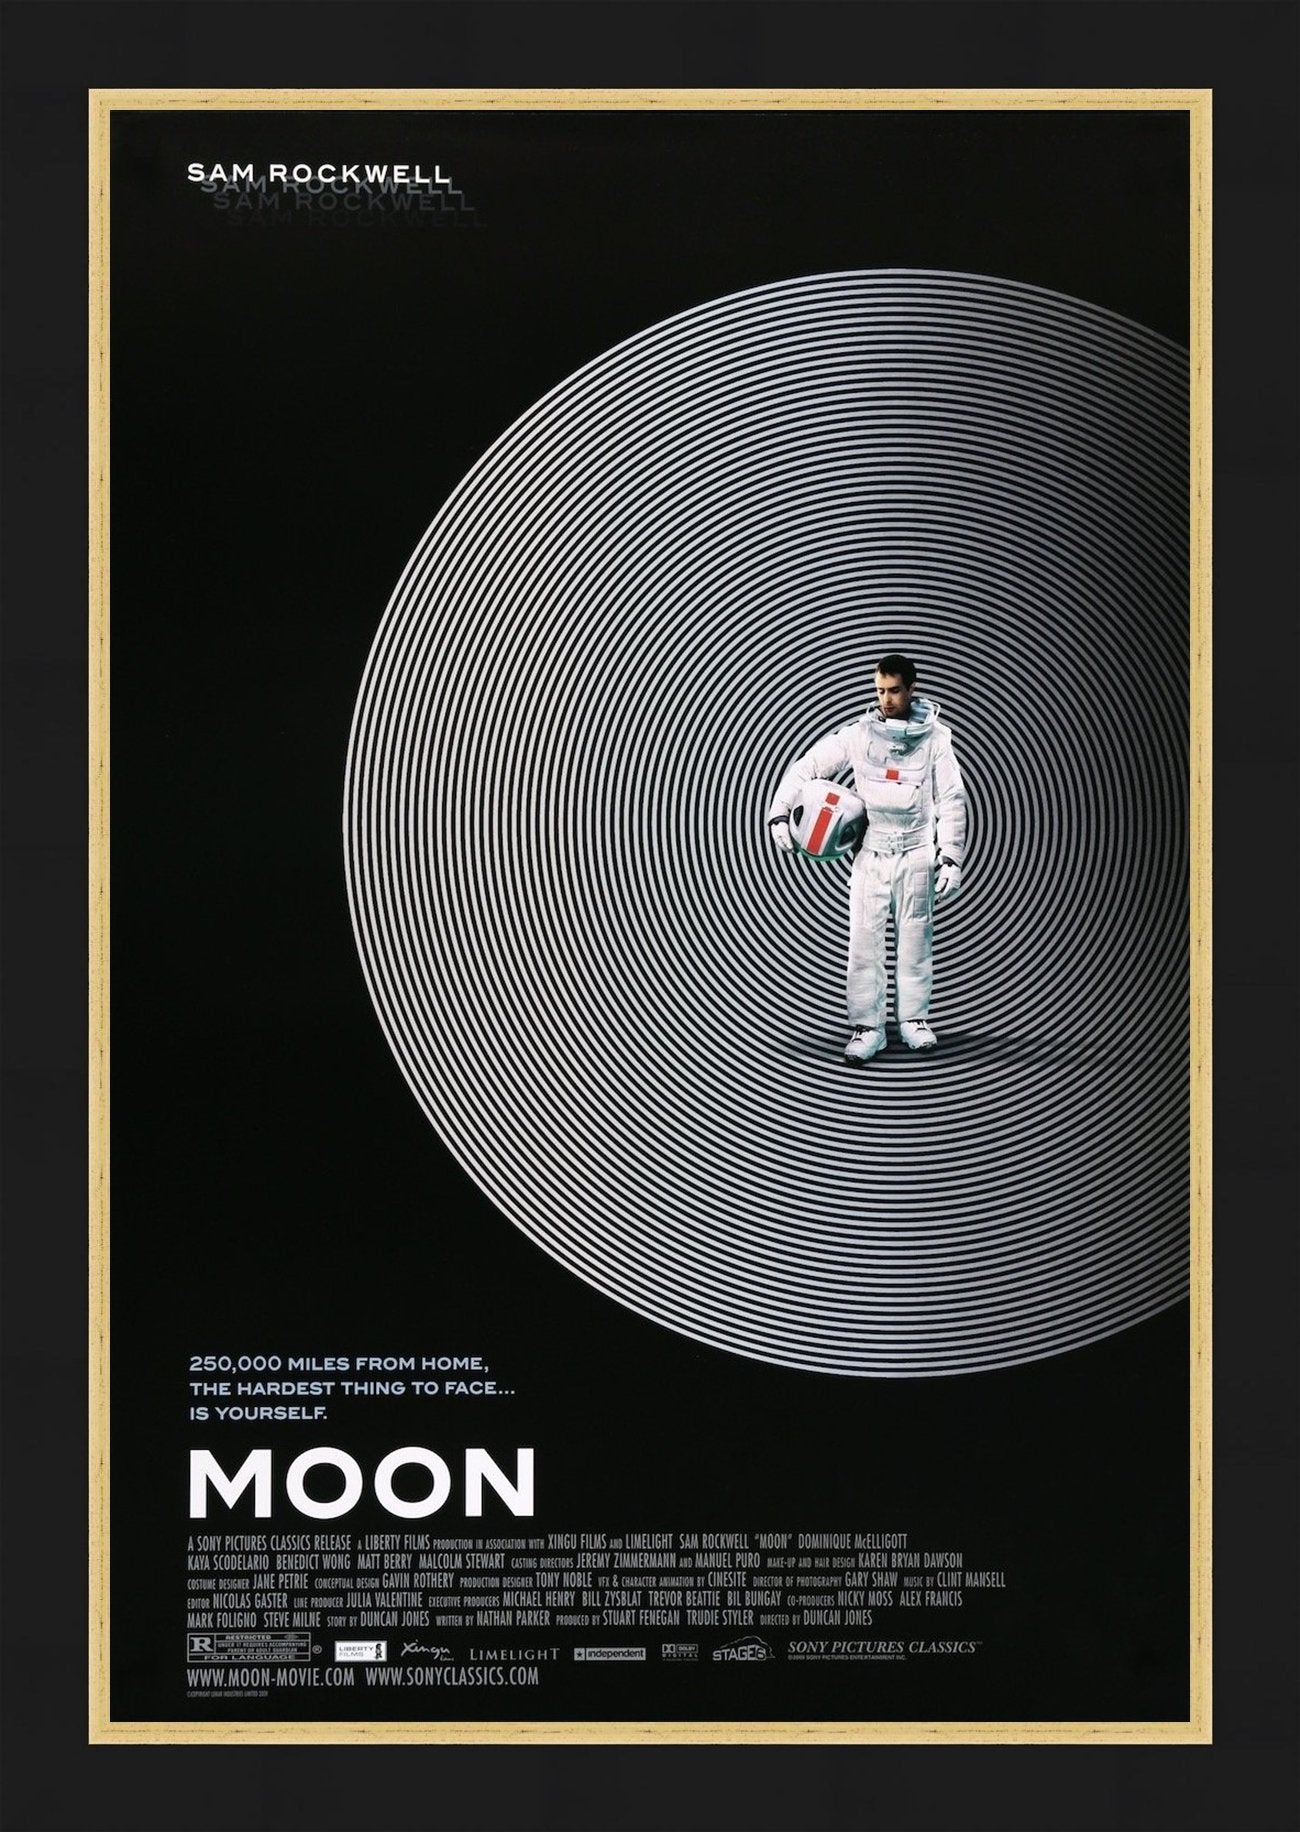 An original movie poster for the film Moon by Duncan Jones